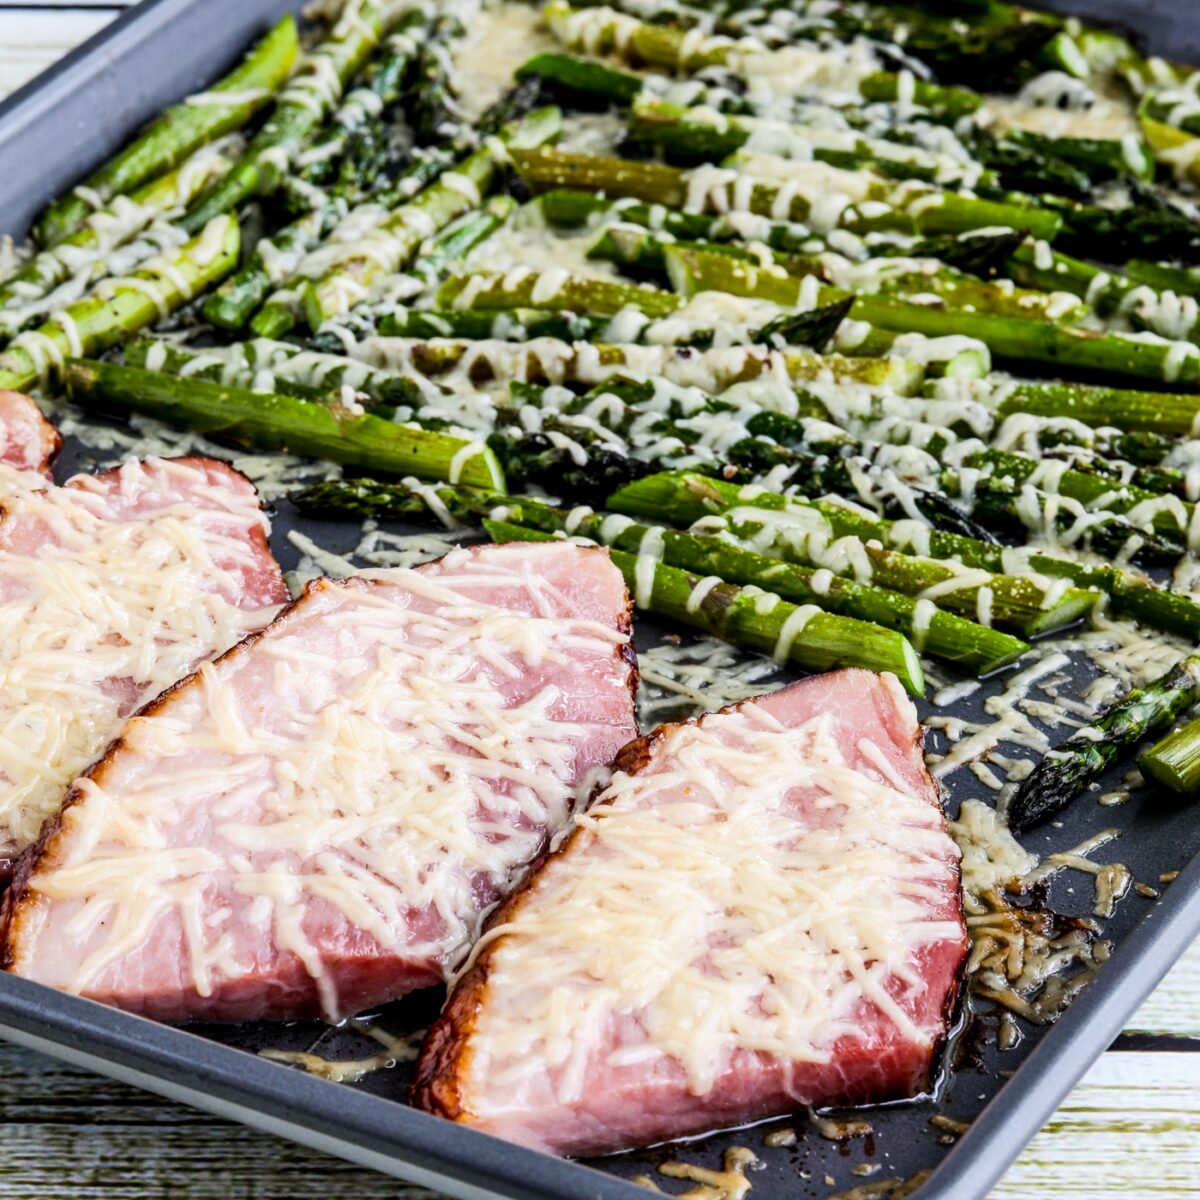 Baked Ham and Asparagus shown on sheet pan with Parmesan cheese sprinkled over.